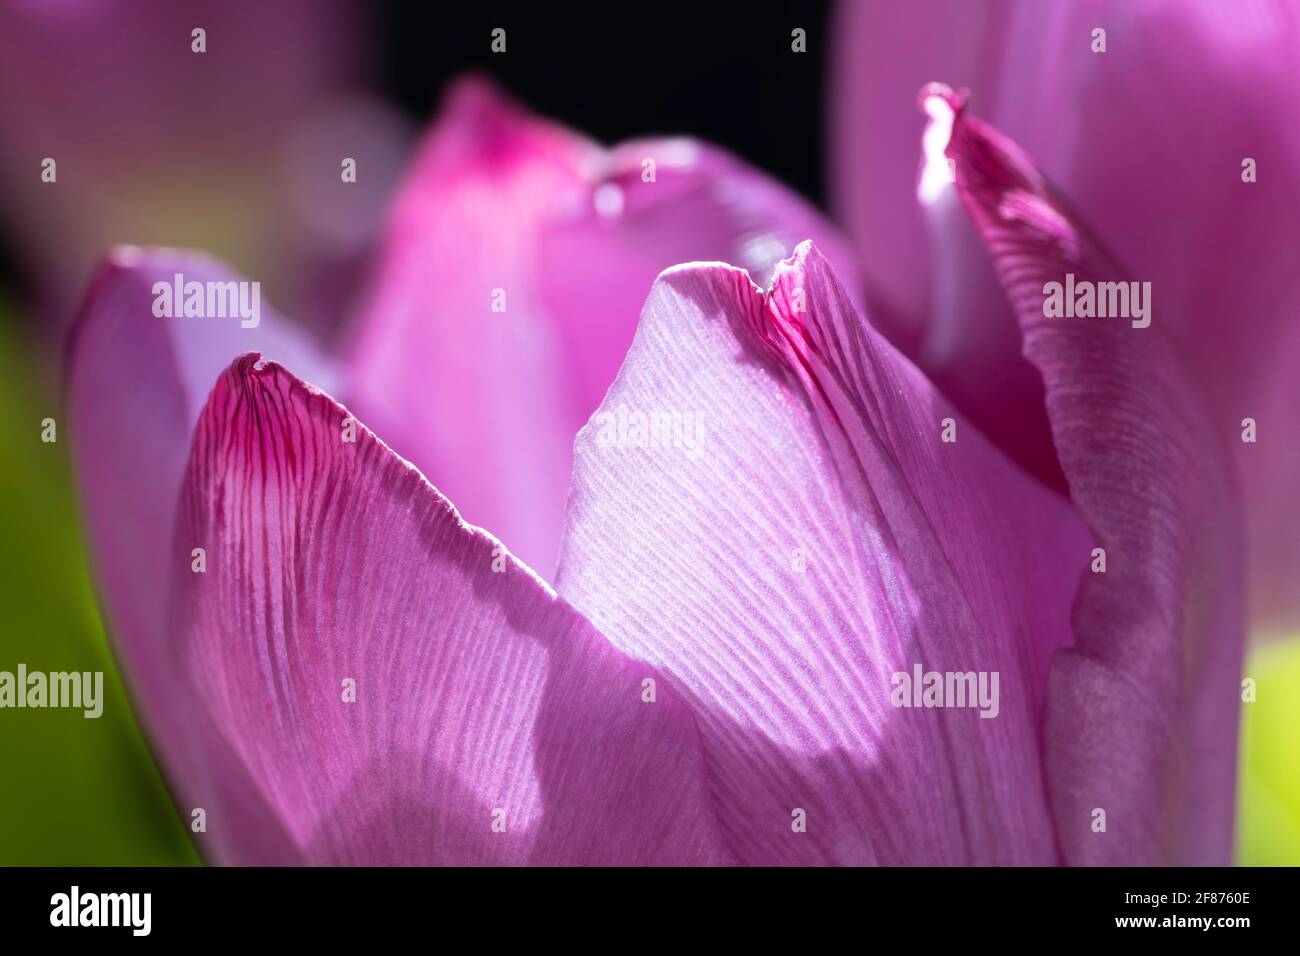 Macro photo of a single light purple tulip with blurred green and violet background Stock Photo